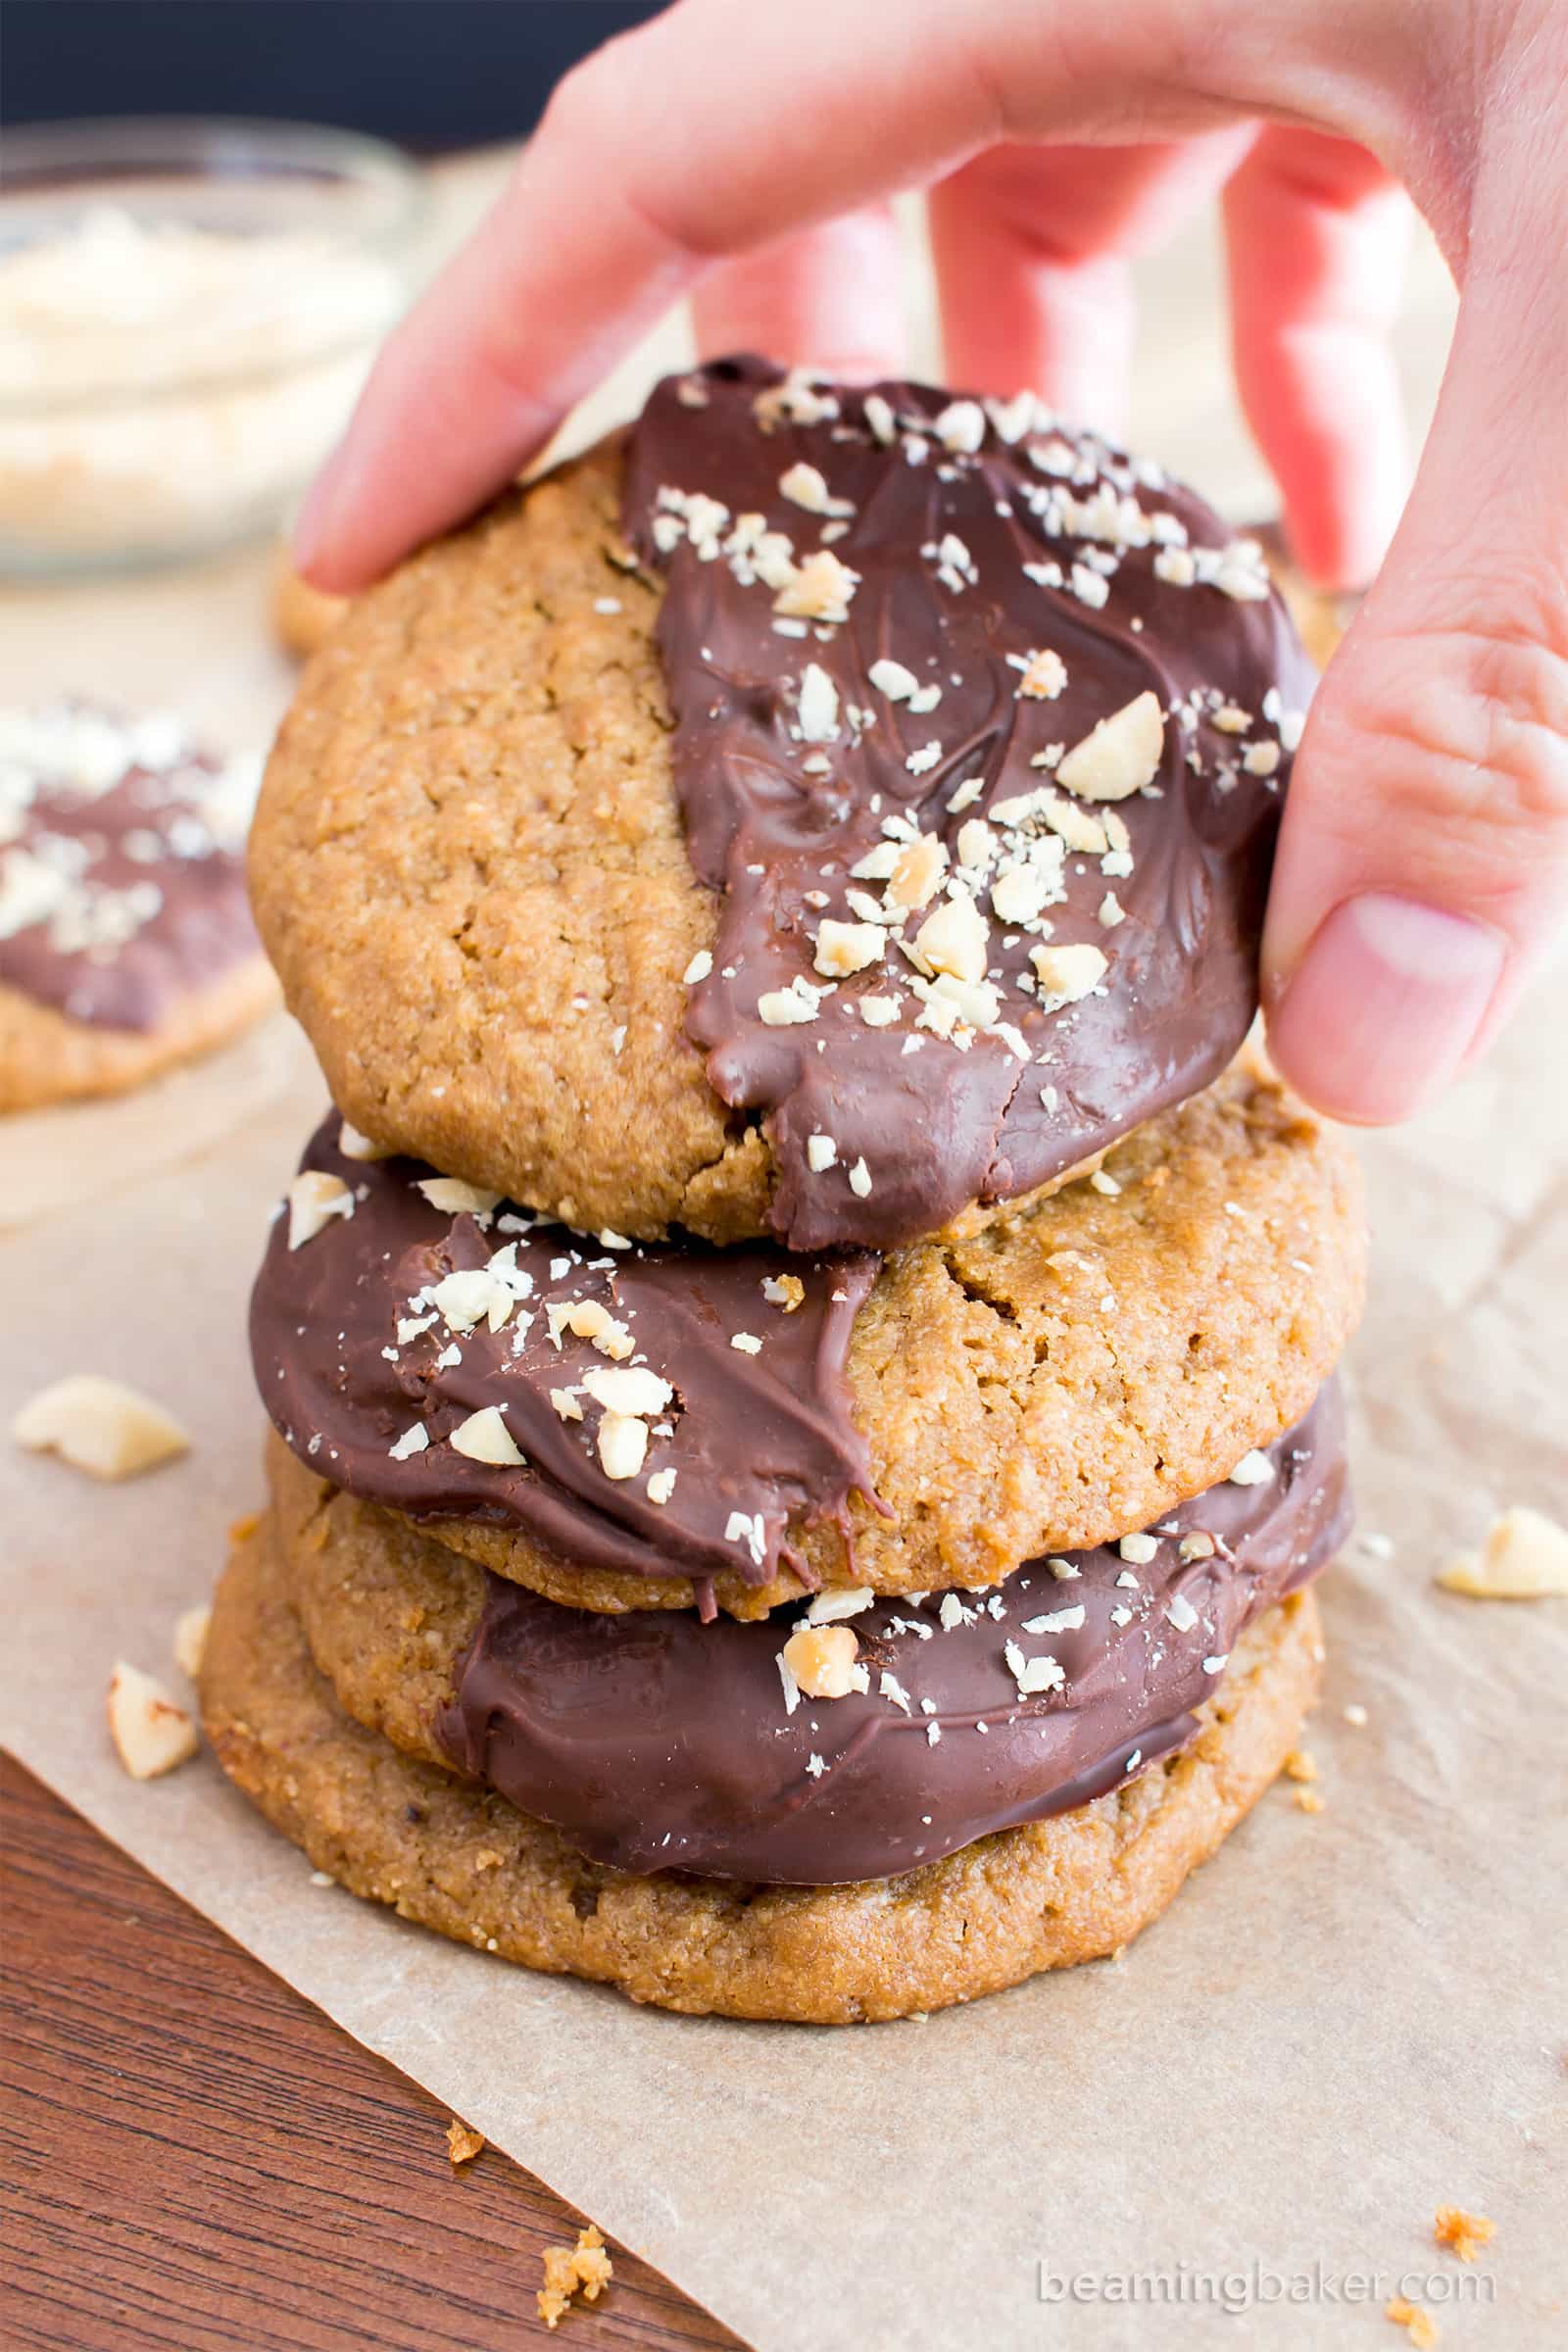 Chocolate Covered Peanut Butter Cookies (V, GF): an easy recipe for soft ‘n chewy peanut butter cookies wrapped in a velvety layer of chocolate and topped with crunchy peanuts. #Vegan #Desserts #GlutenFree #DairyFree #Healthy #Holiday | Recipe on BeamingBaker.com